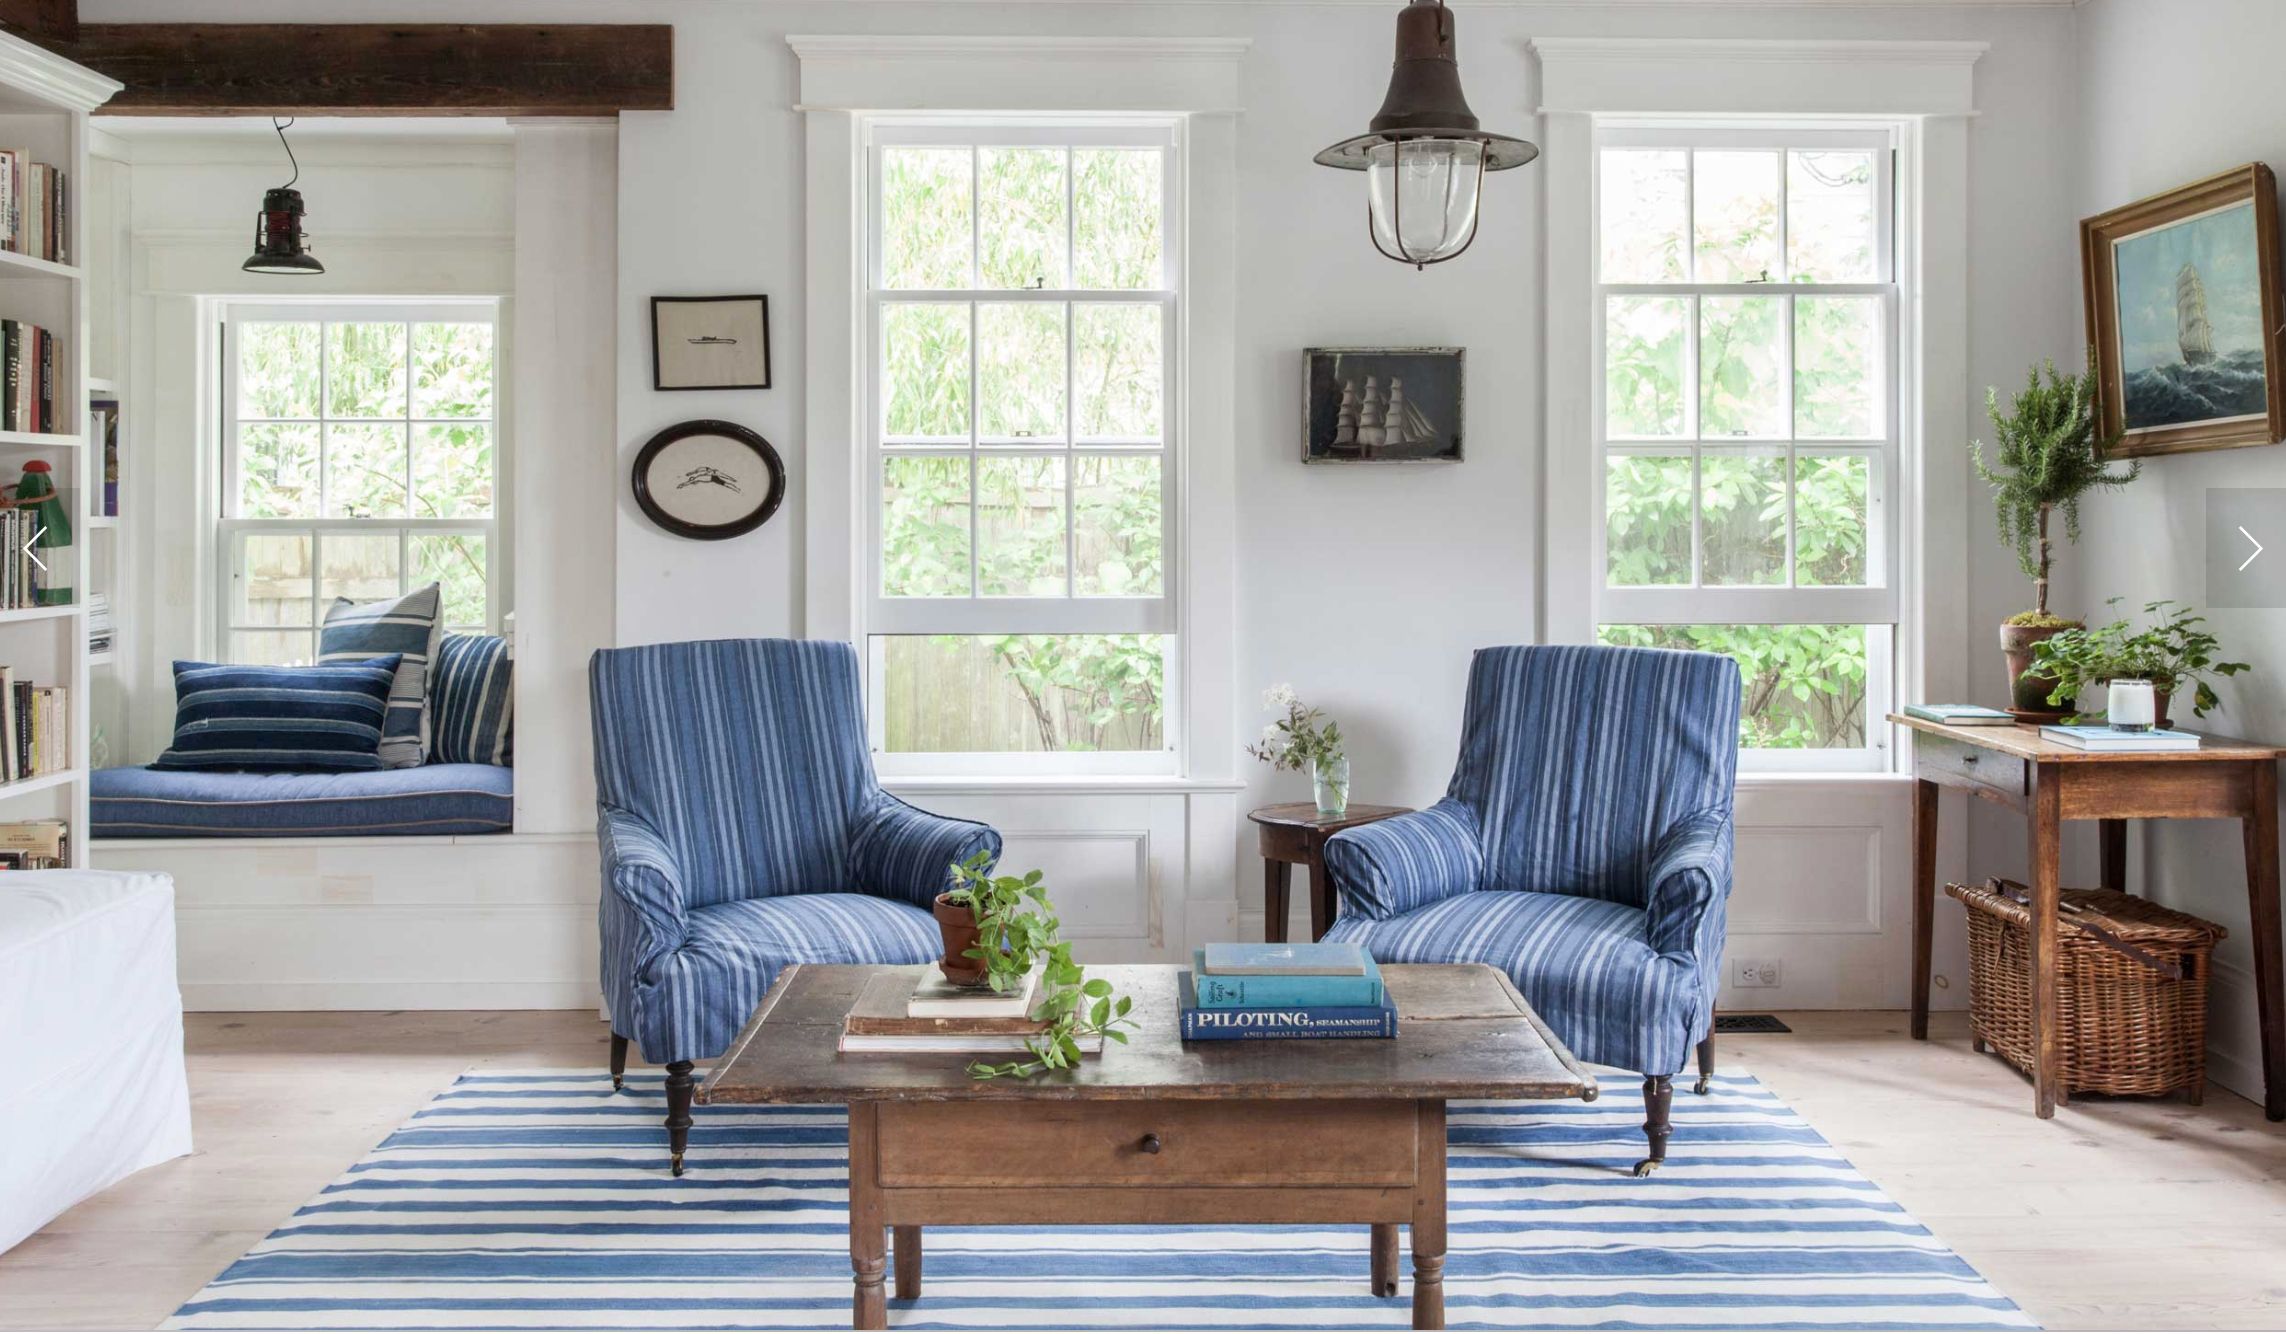 20 Cozy Window Seat Ideas How To Design A Window Reading Nook